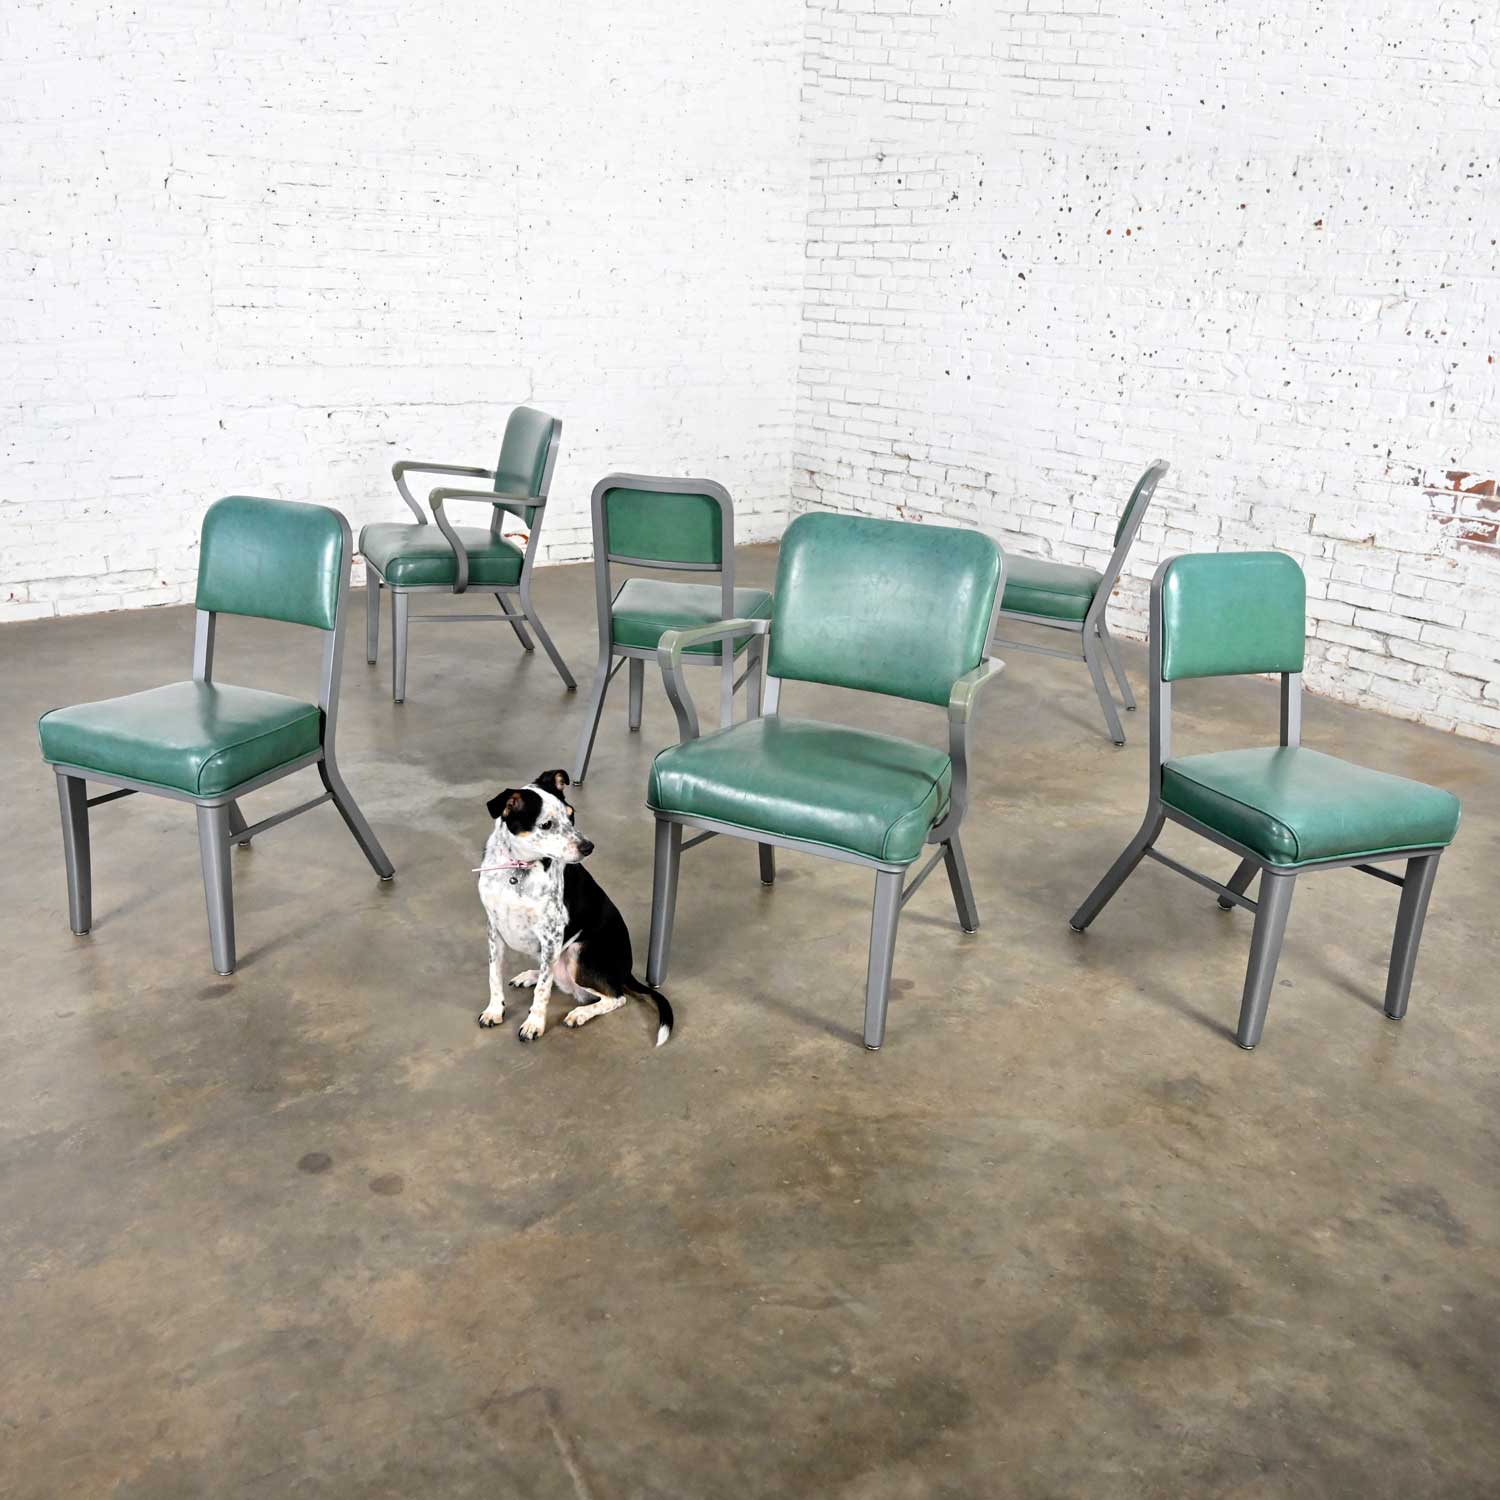 Streamline Industrial Modern Metal & Green Vinyl Faux Leather Dining Chairs Style 145 by Steelcase set of 6